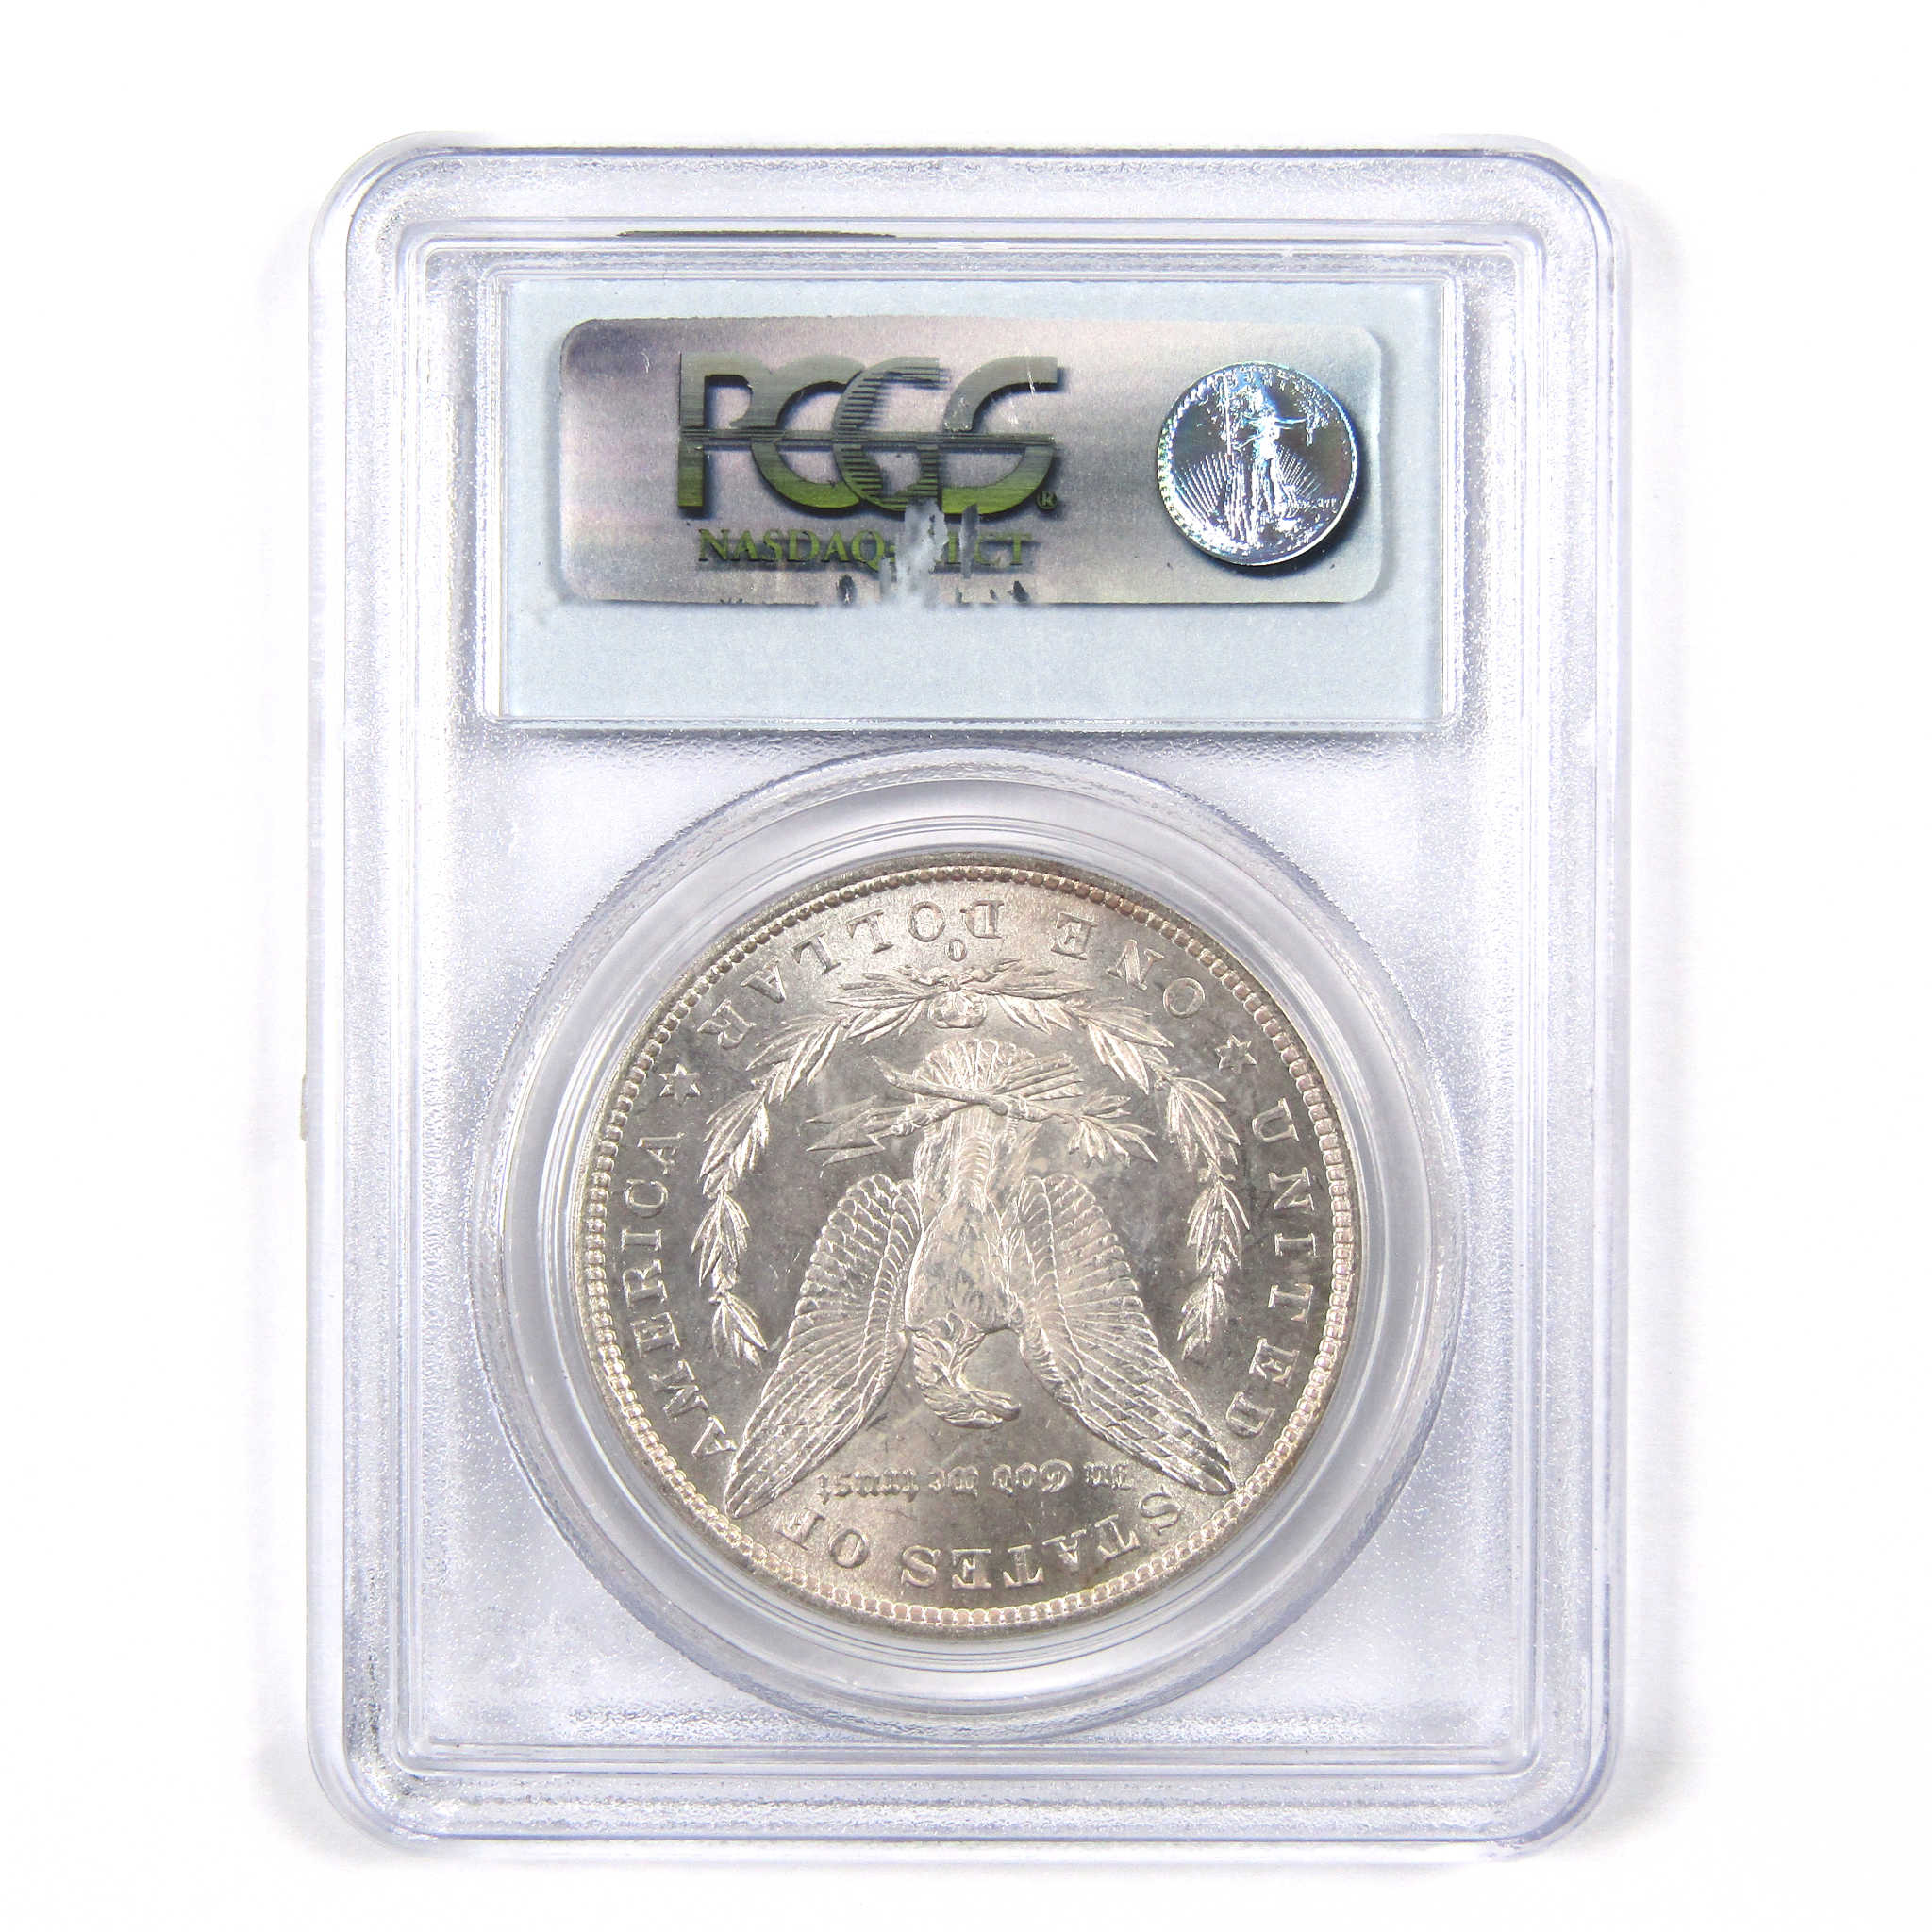 1879 O Morgan Dollar MS 63 PCGS 90% Silver $1 Uncirculated SKU:I9204 - Morgan coin - Morgan silver dollar - Morgan silver dollar for sale - Profile Coins &amp; Collectibles